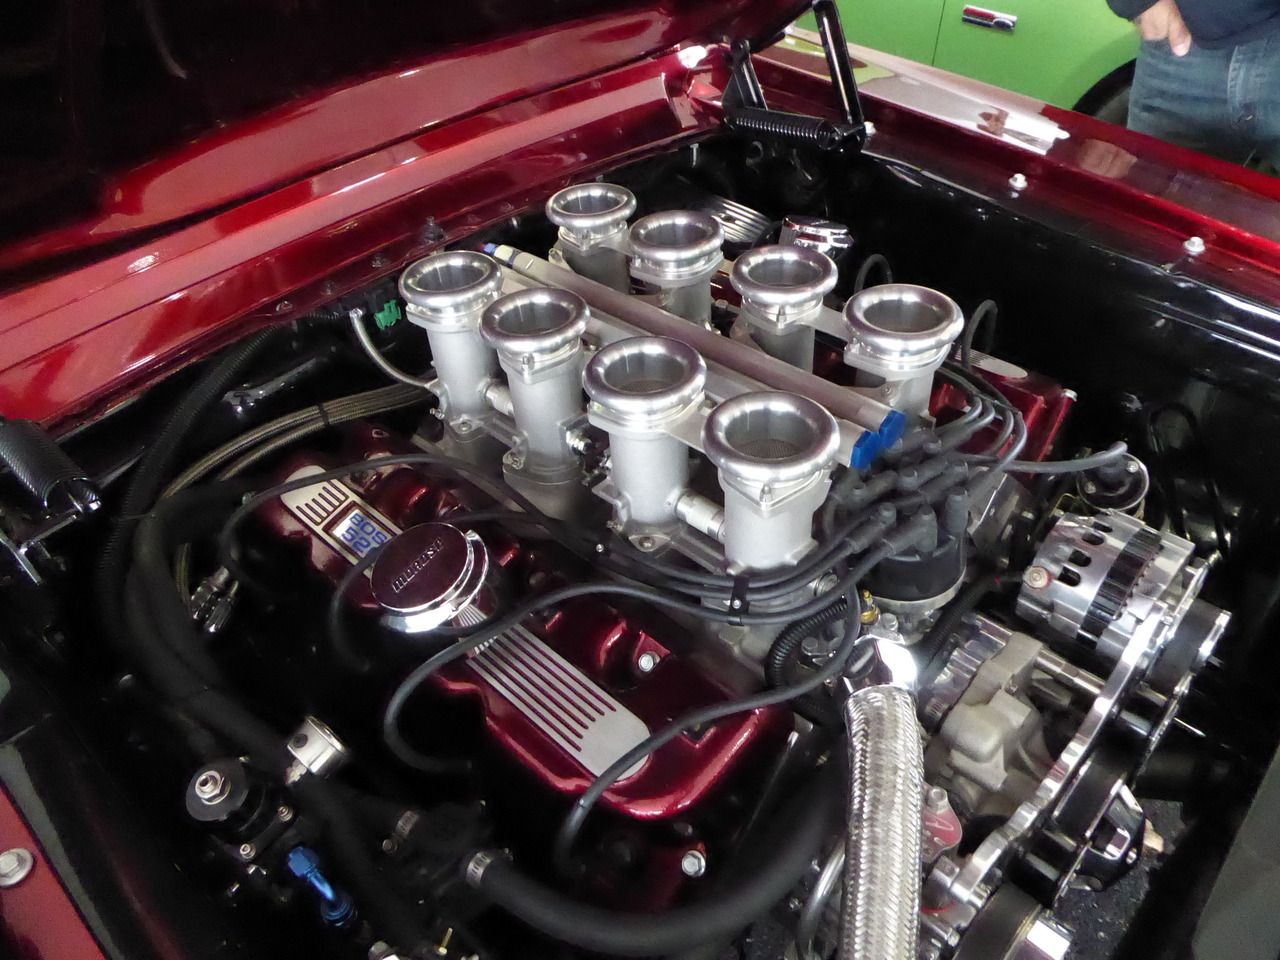 fromcruise-instoconcours:  ‘68 Mustang with a Boss 520 crate engine and uncountable